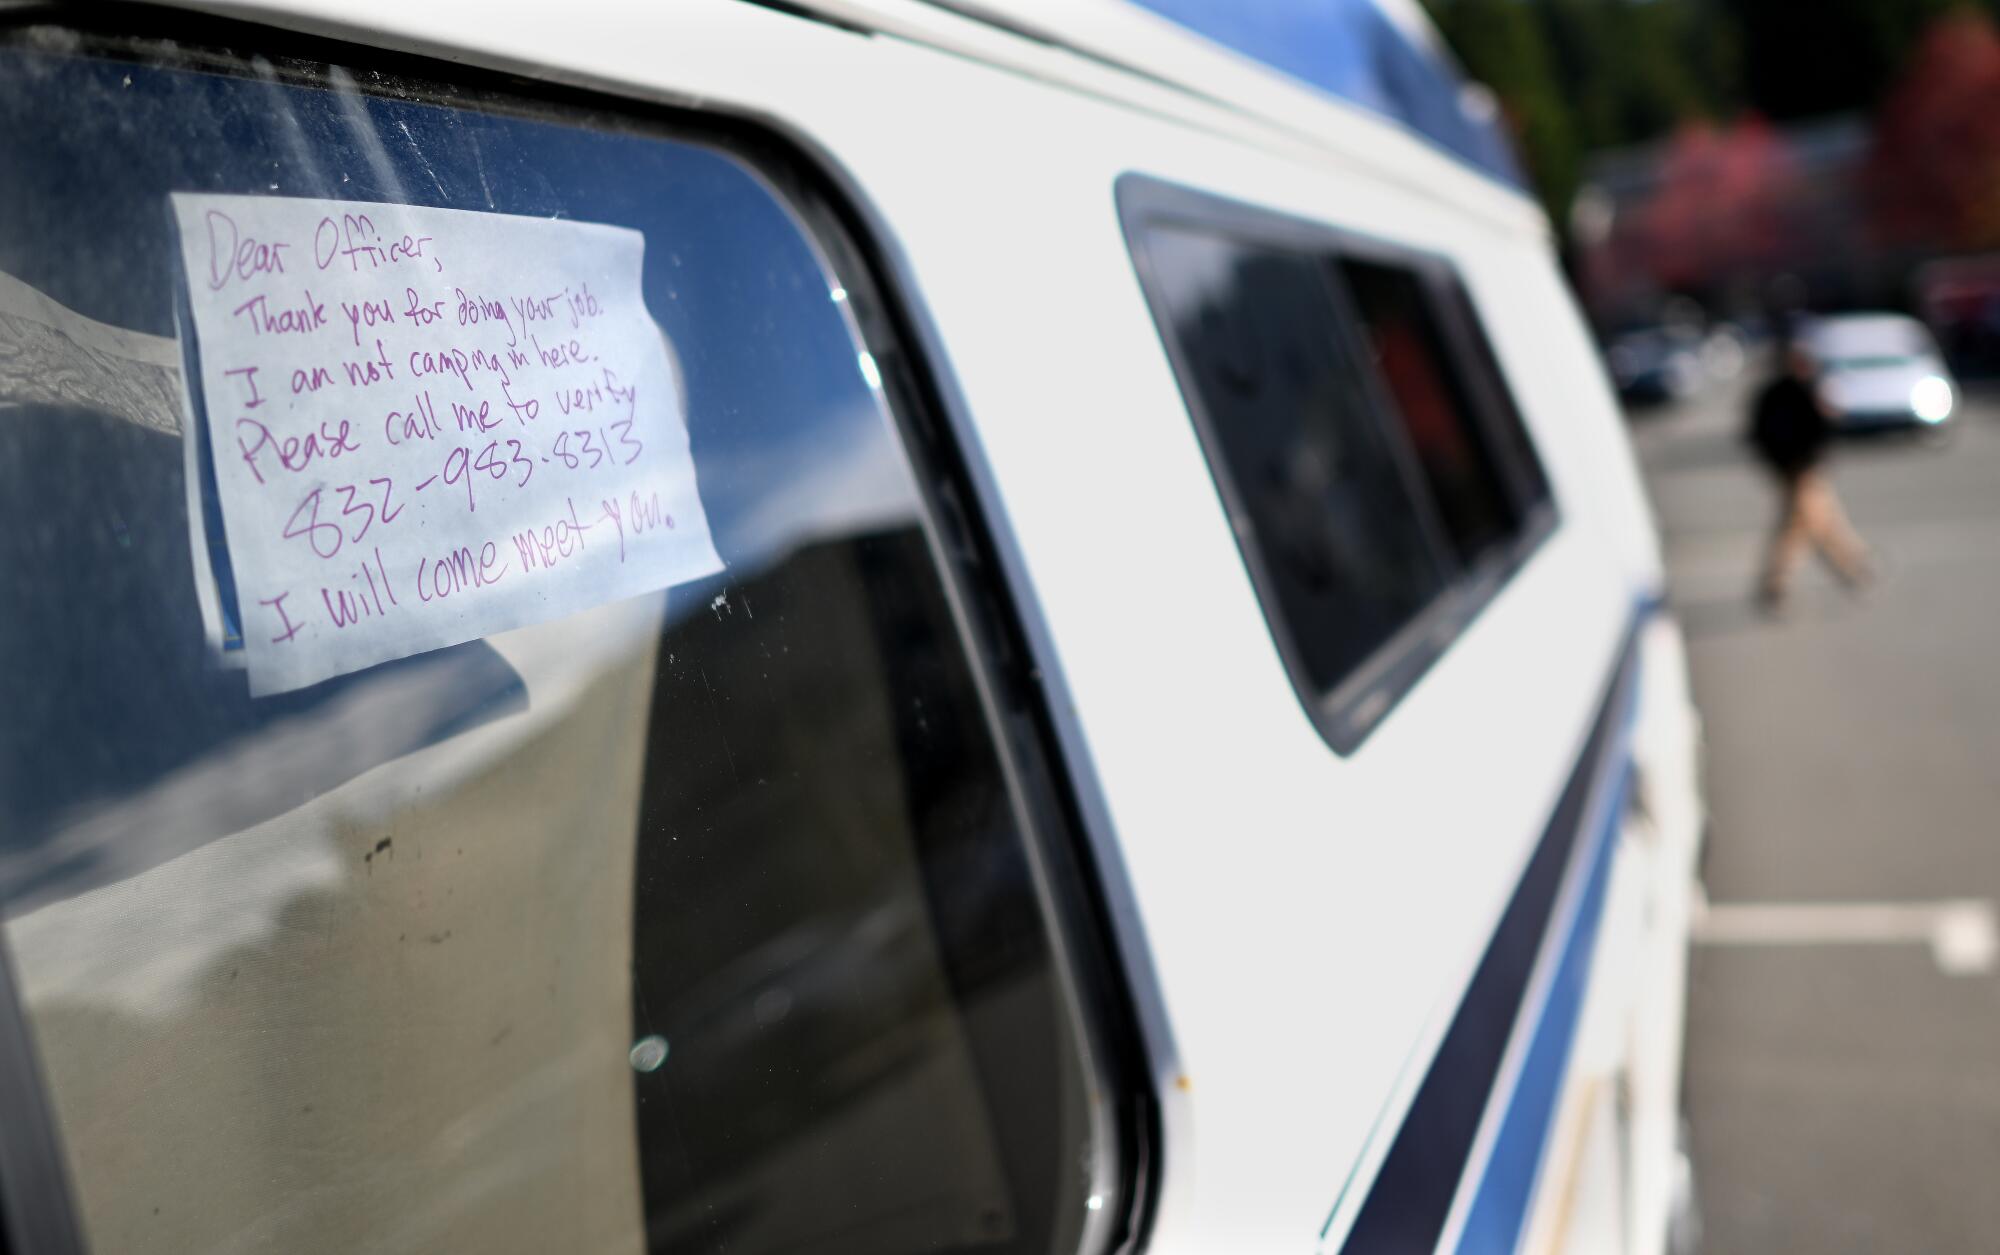 A handwritten note in red ink is taped on the inside of a car window.